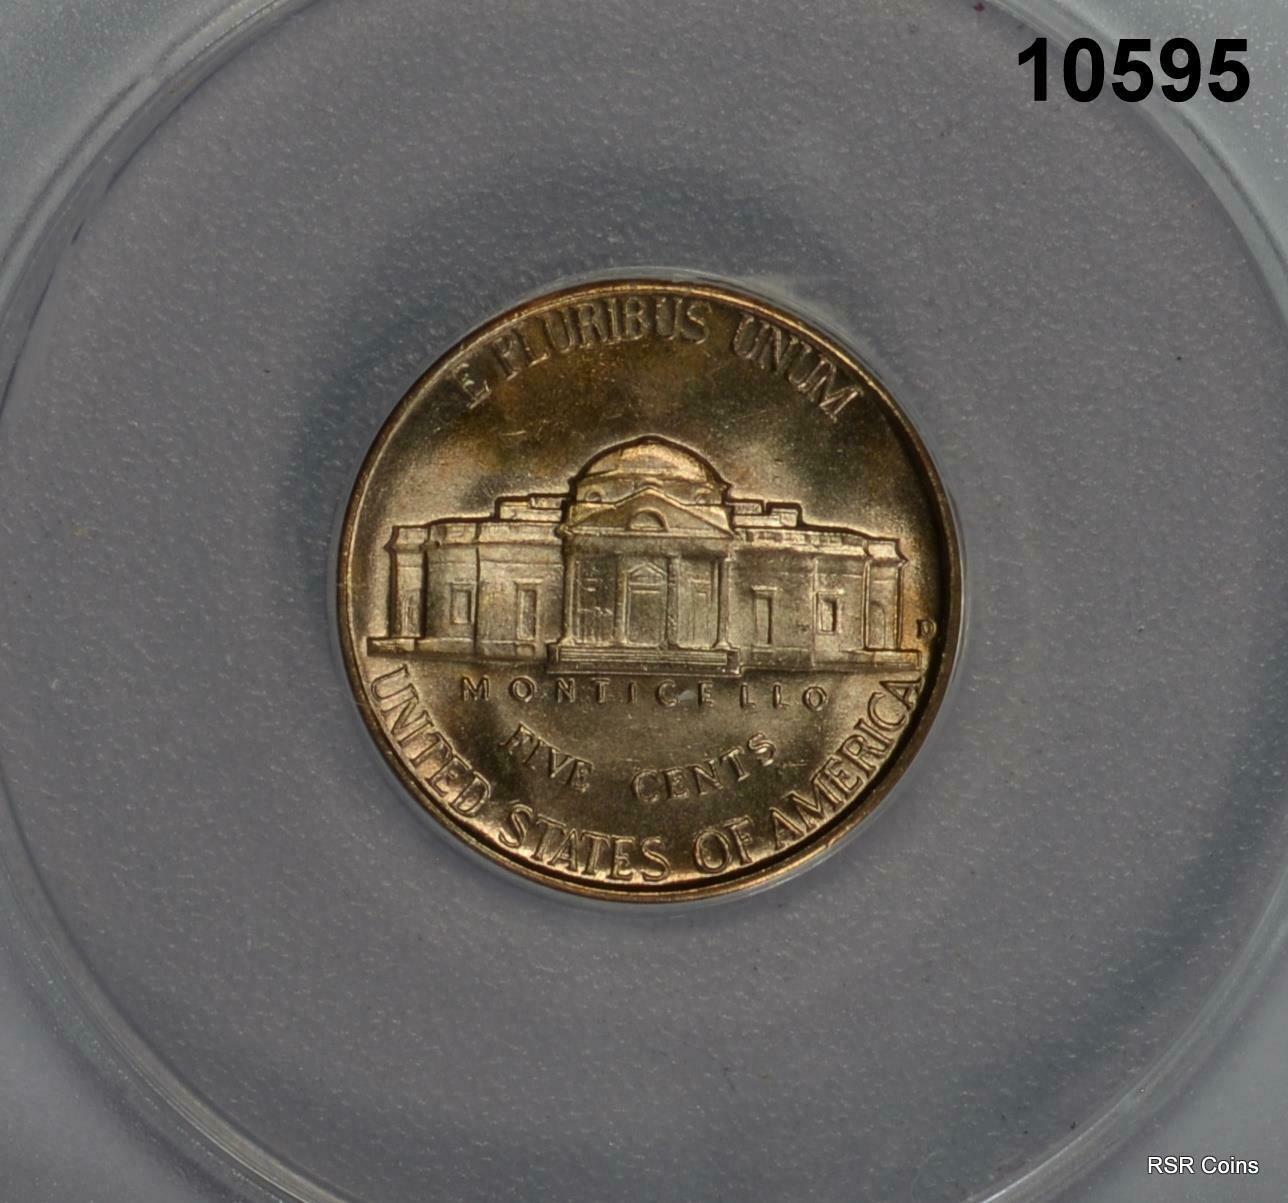 1950 D JEFFERSON NICKEL ANACS CERTIFIED MS-66 5 STEPS GOLD TONING WOW! #10595